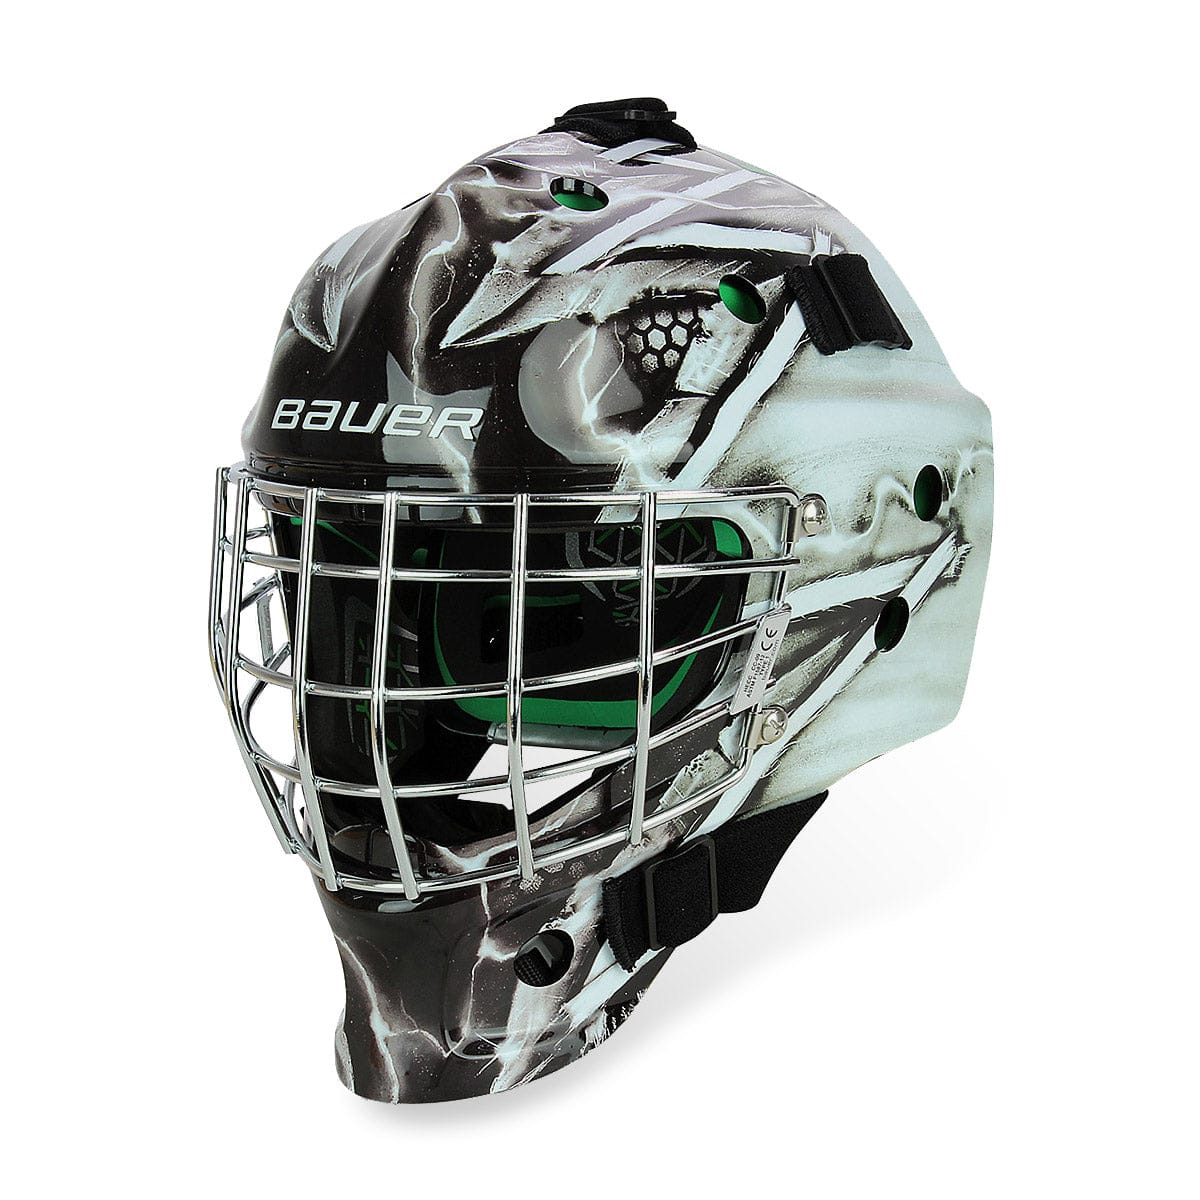 Bauer NME 4 Youth Goalie Mask - Los Angeles Kings - The Hockey Shop Source For Sports